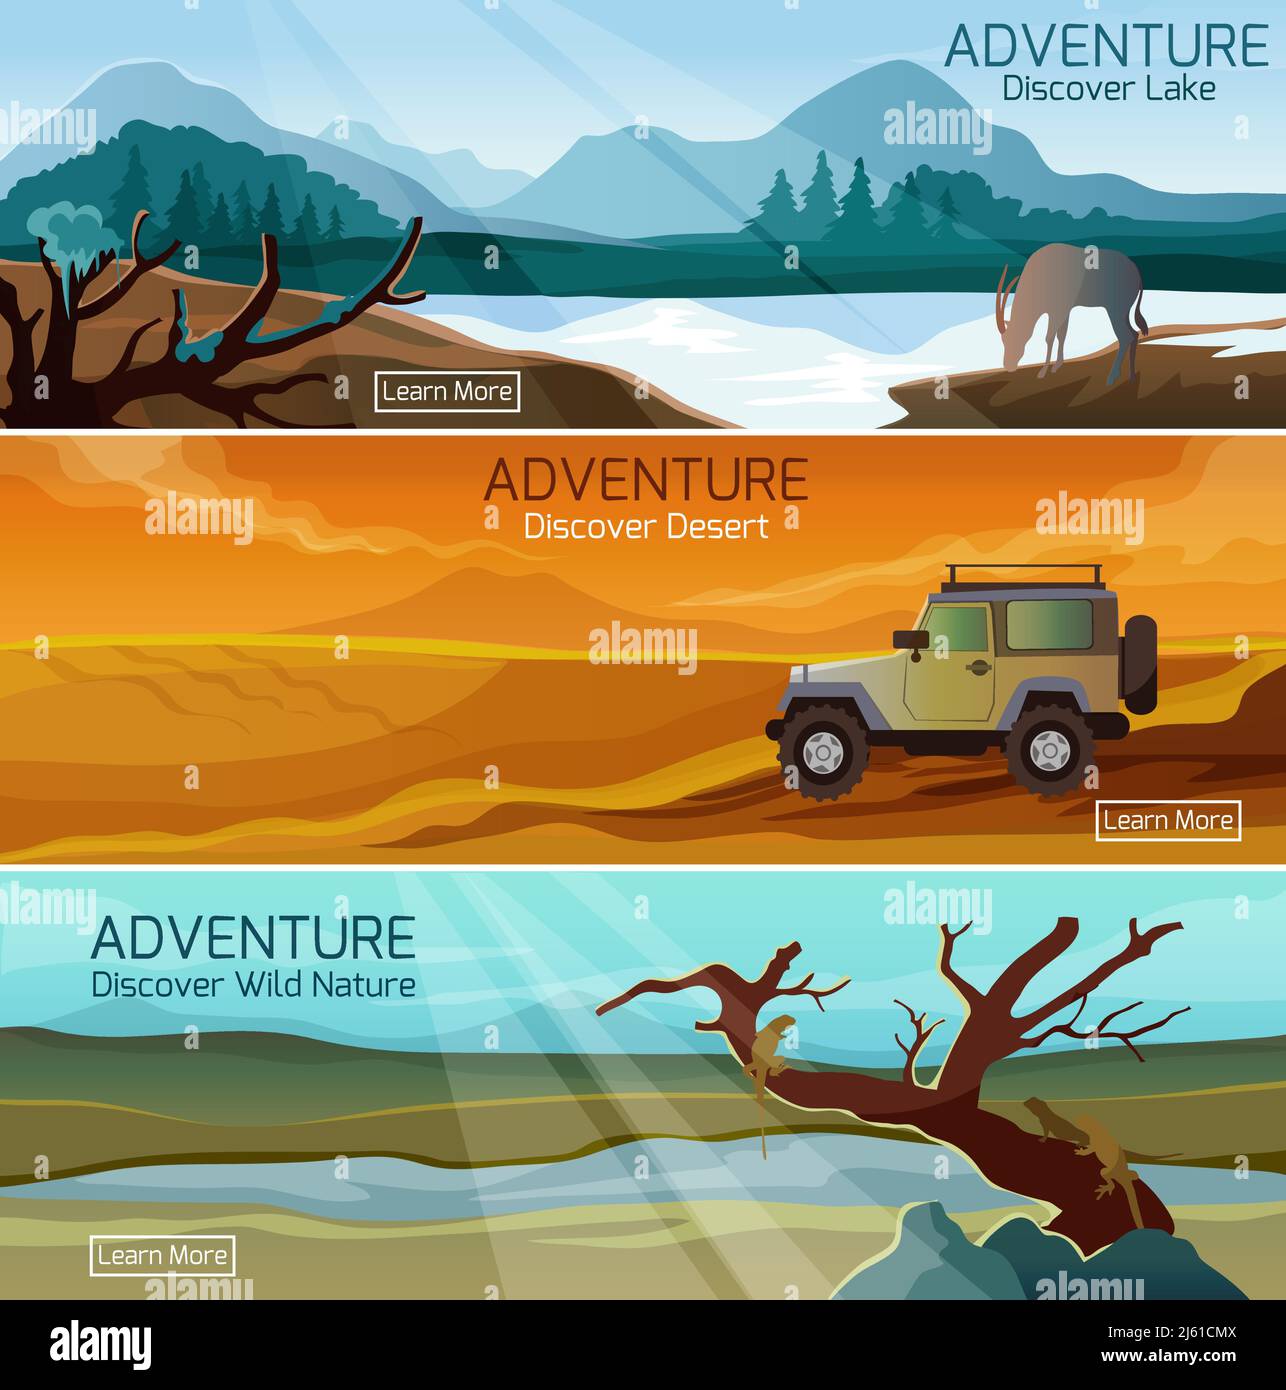 Discover nature wild life 3 flat banners set with lake and desert adventures abstract isolated vector illustration Stock Vector